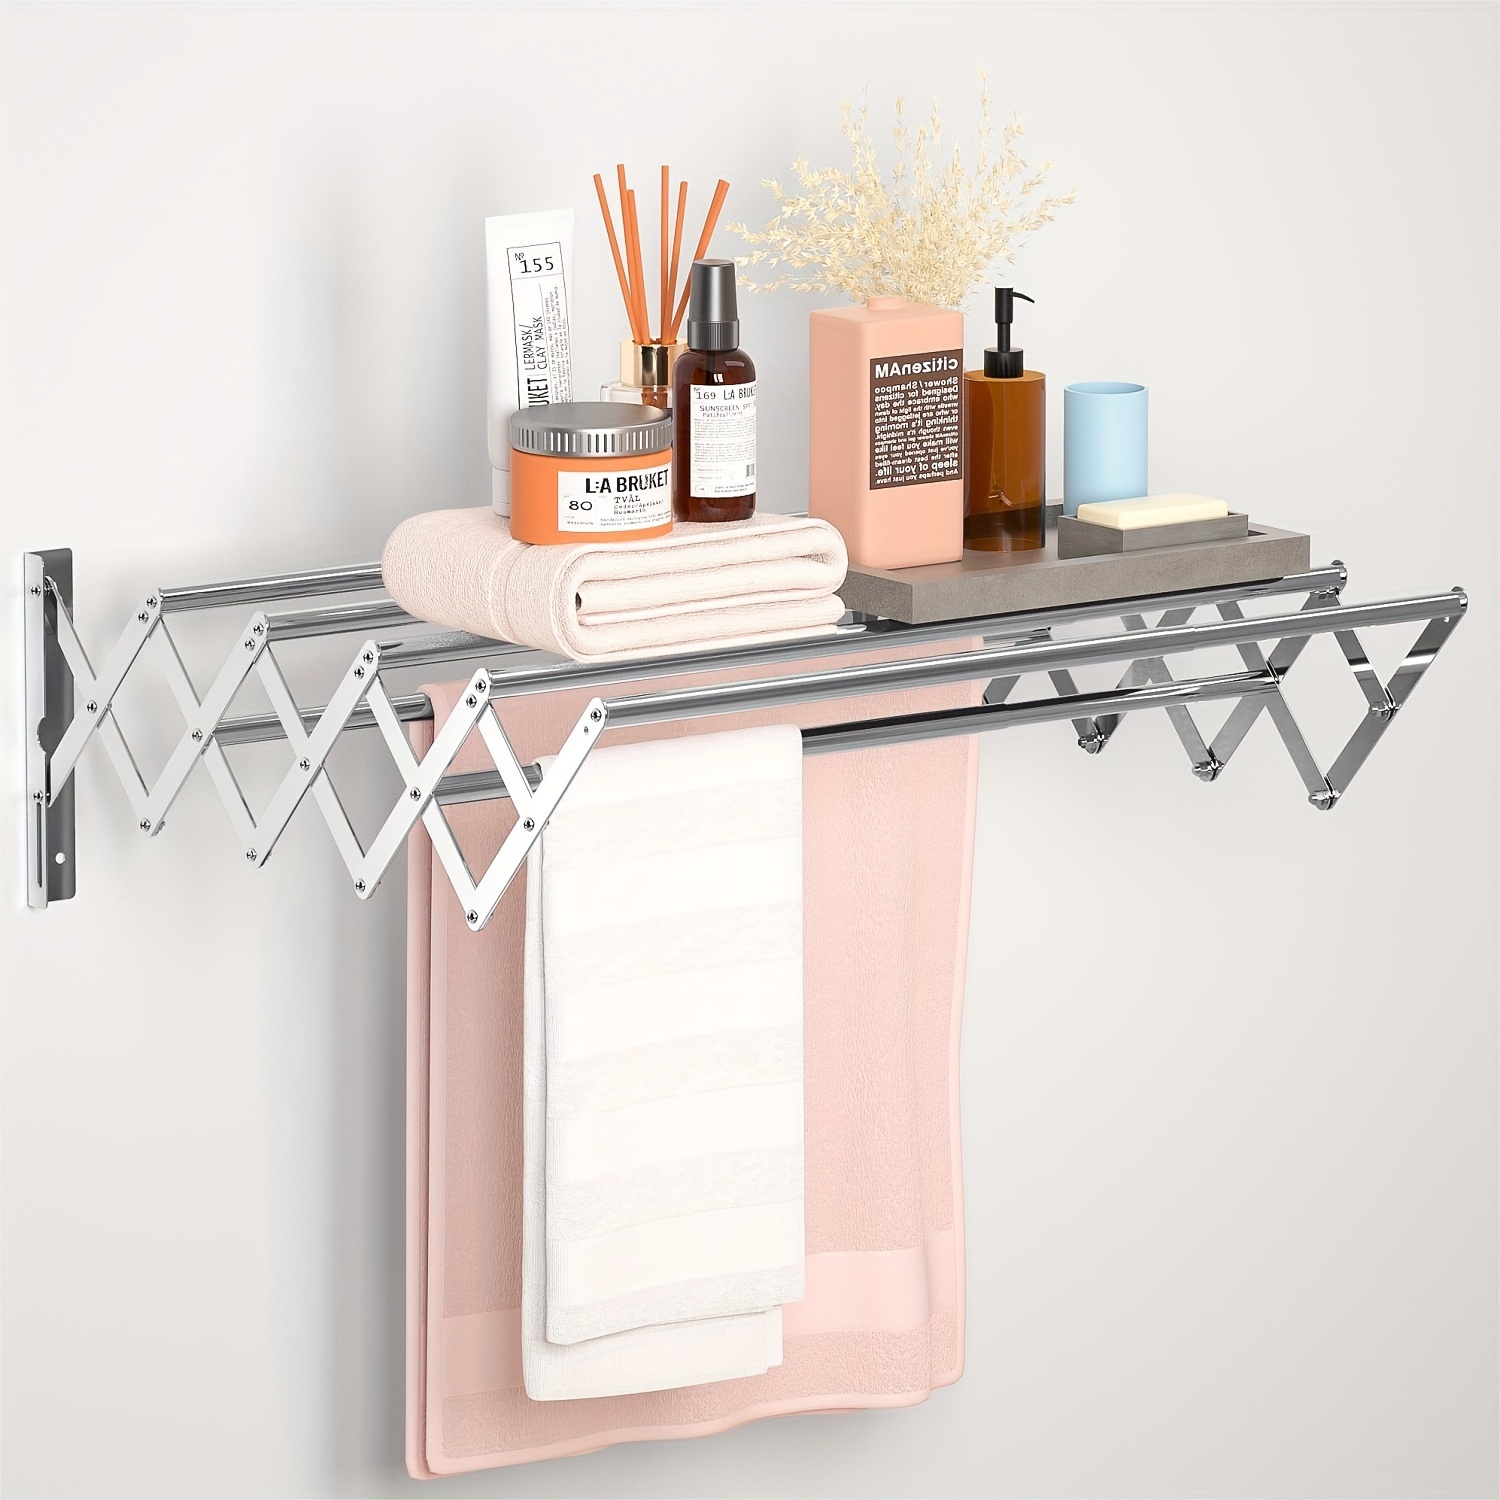 Laundry Drying Rack for Clothes with Steel Bars